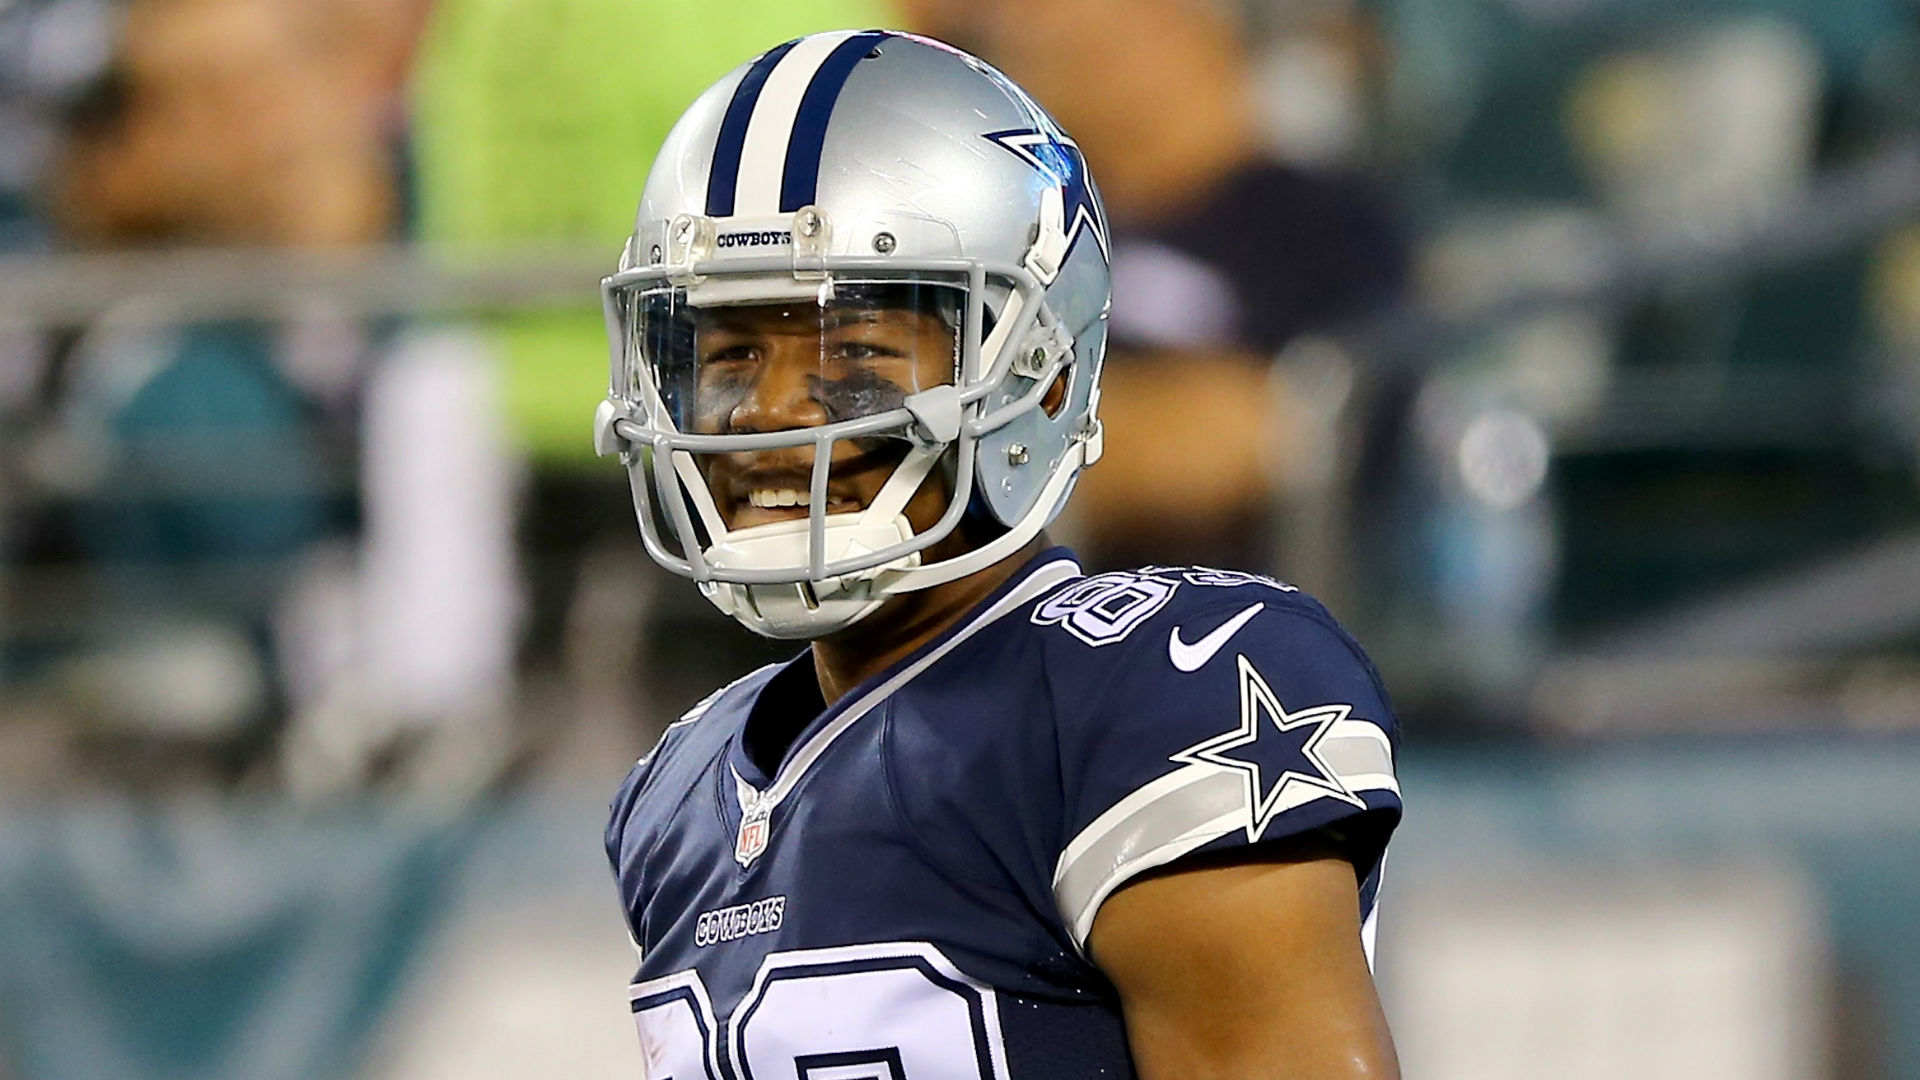 Cowboys' Terrance Williams will not face further charges stemming from May arrest, attorney says